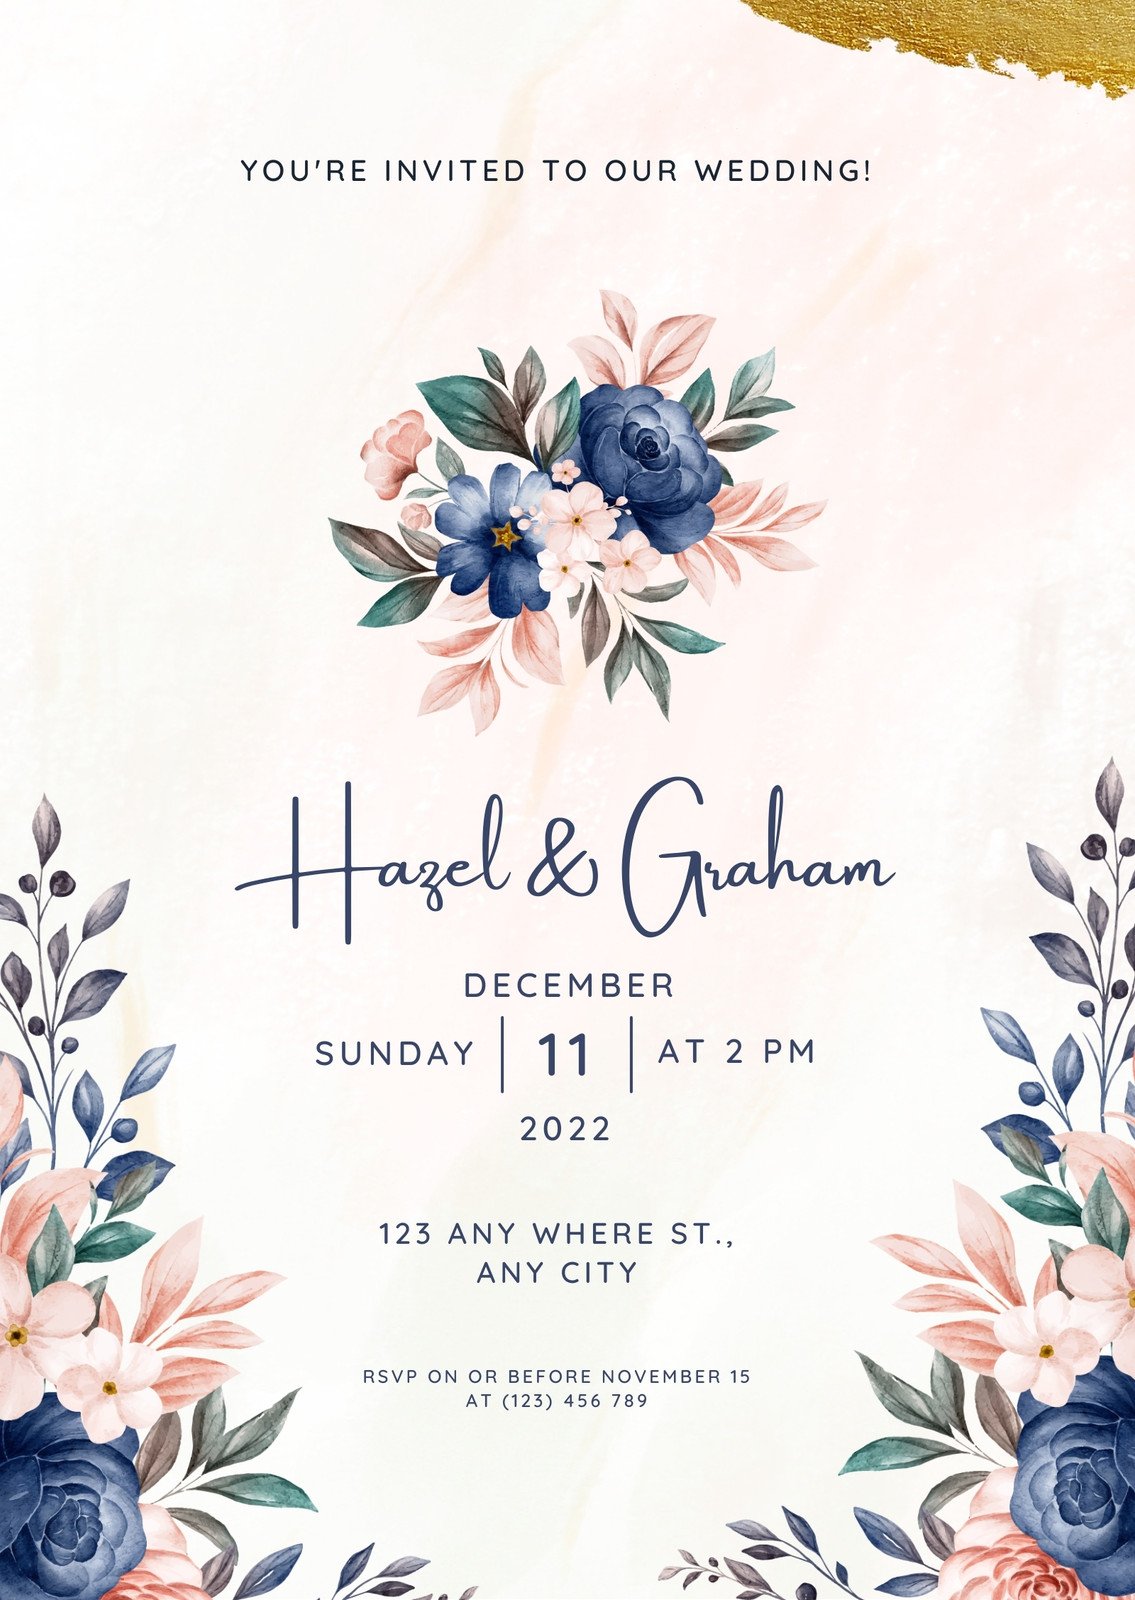 Wedding invitation templates to customize for free | Canva